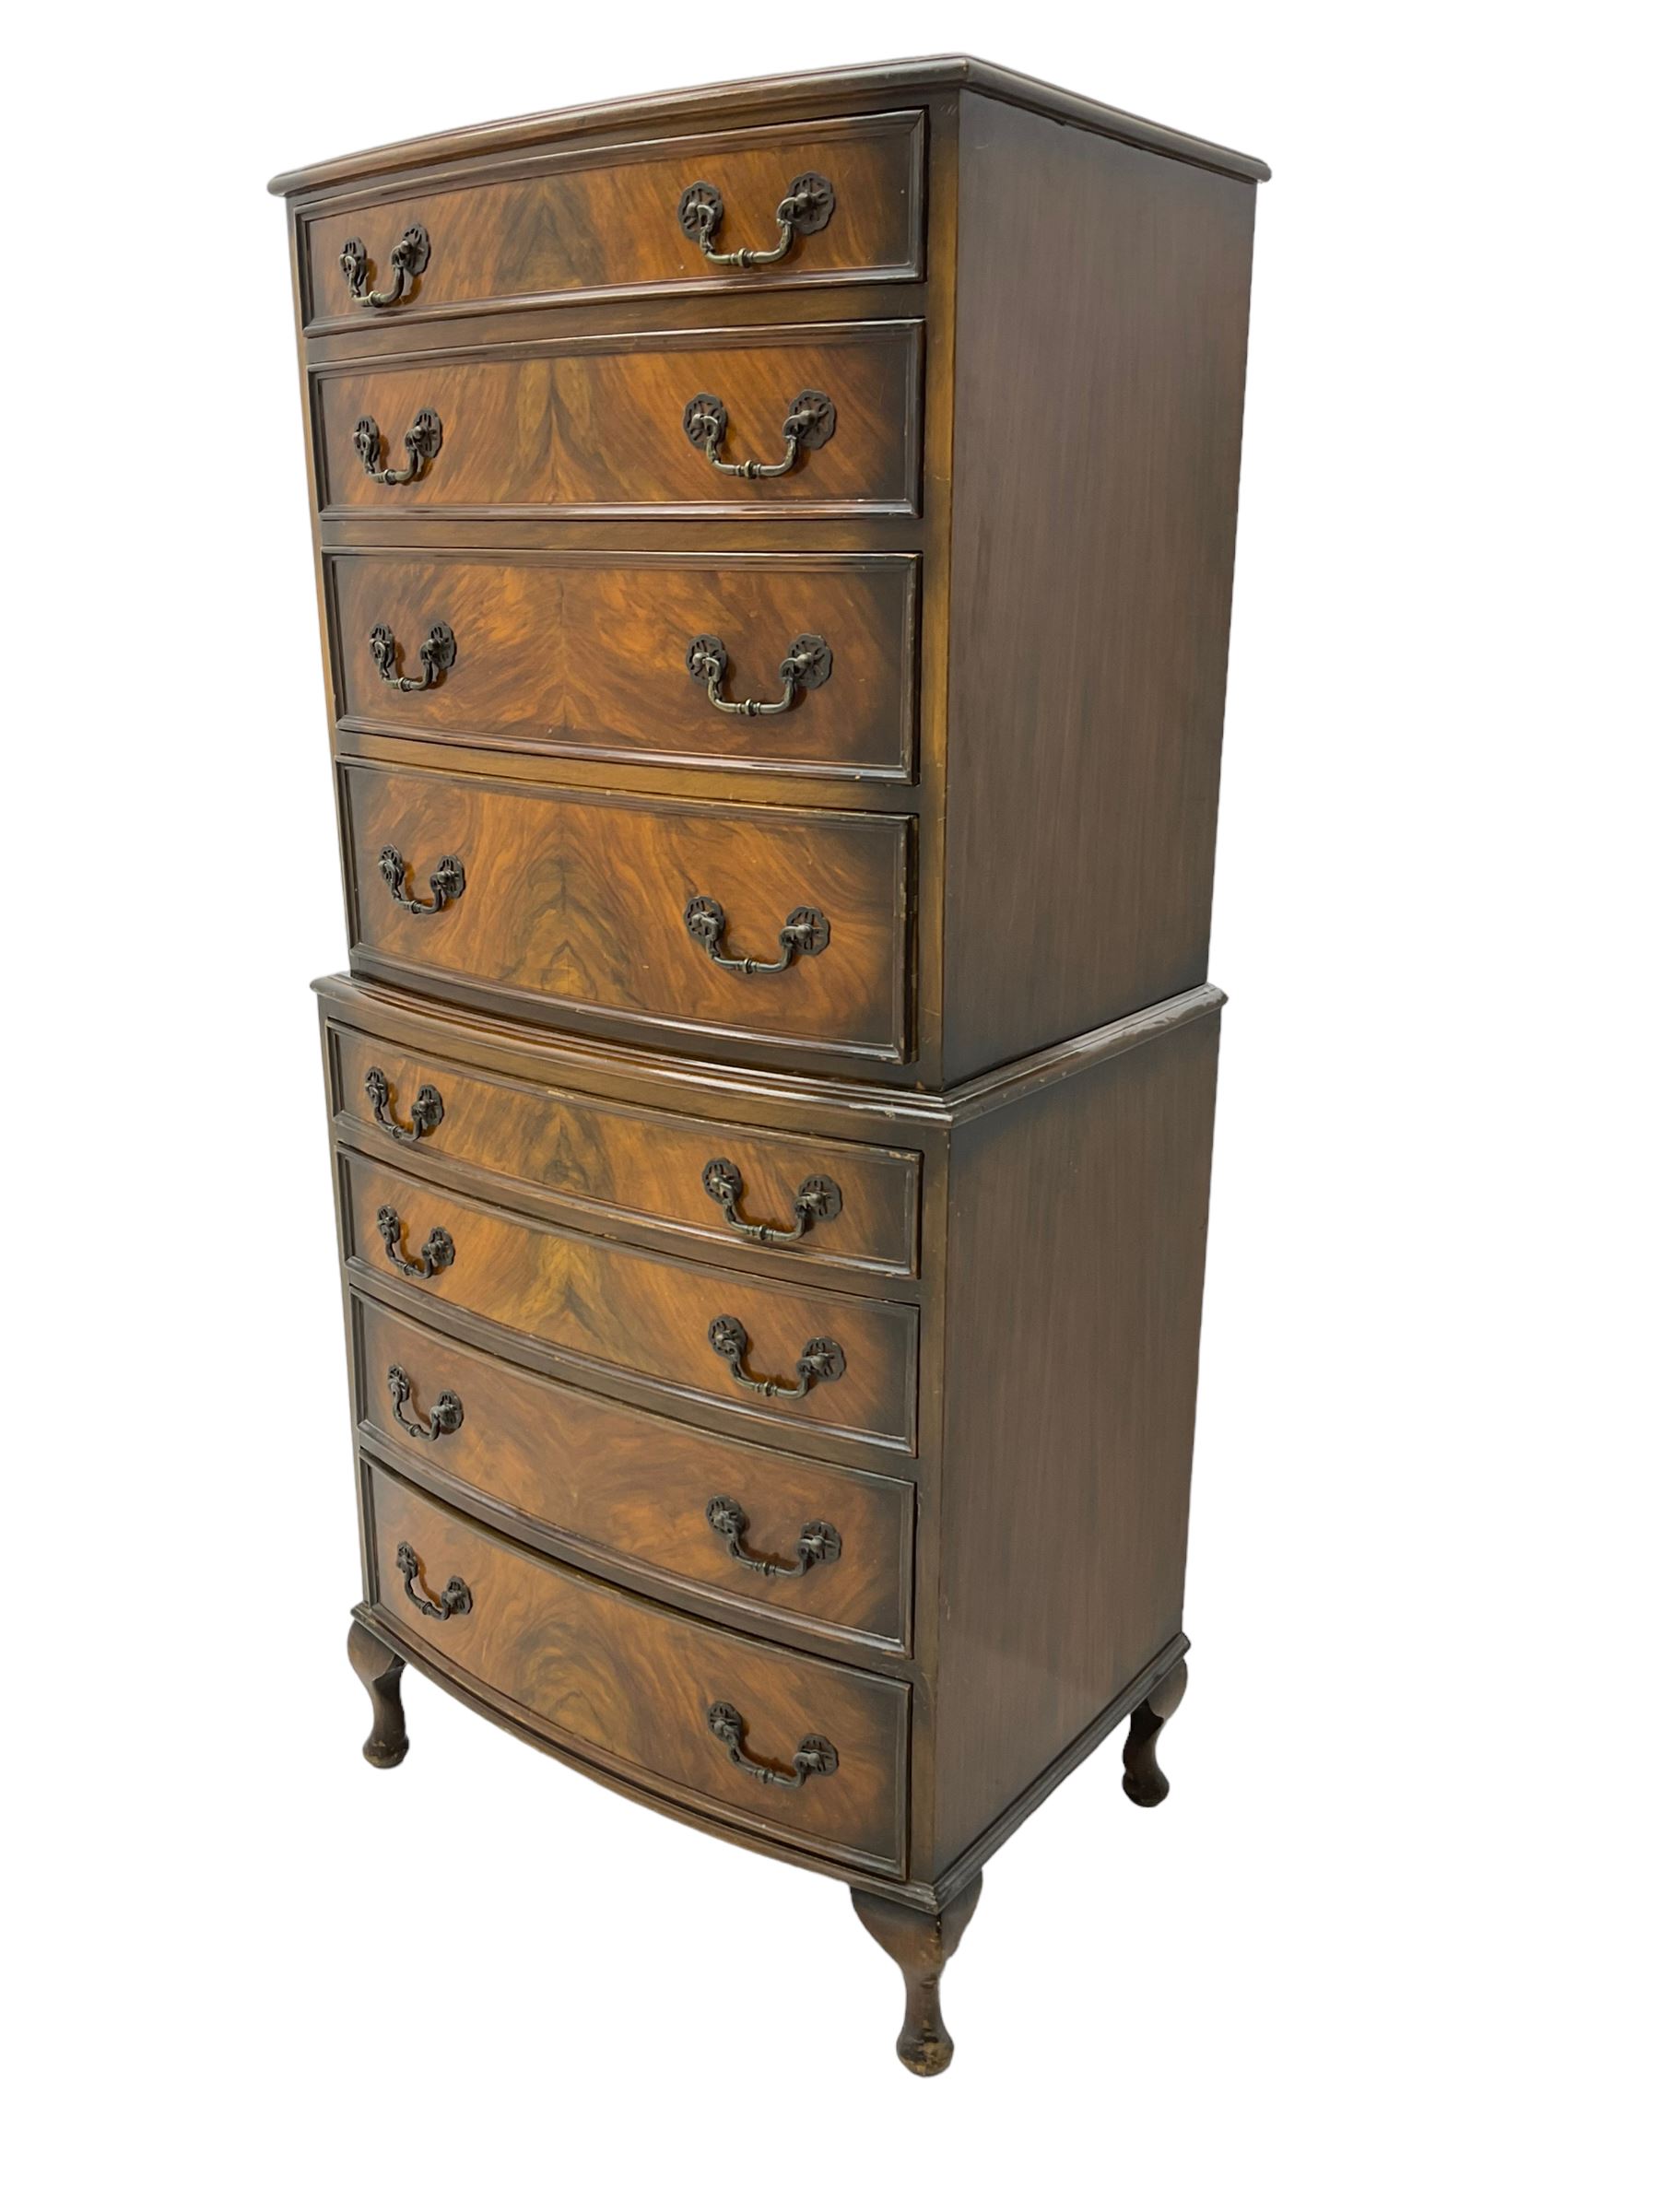 Mid-20th century walnut bow-front chest on chest - Image 5 of 7